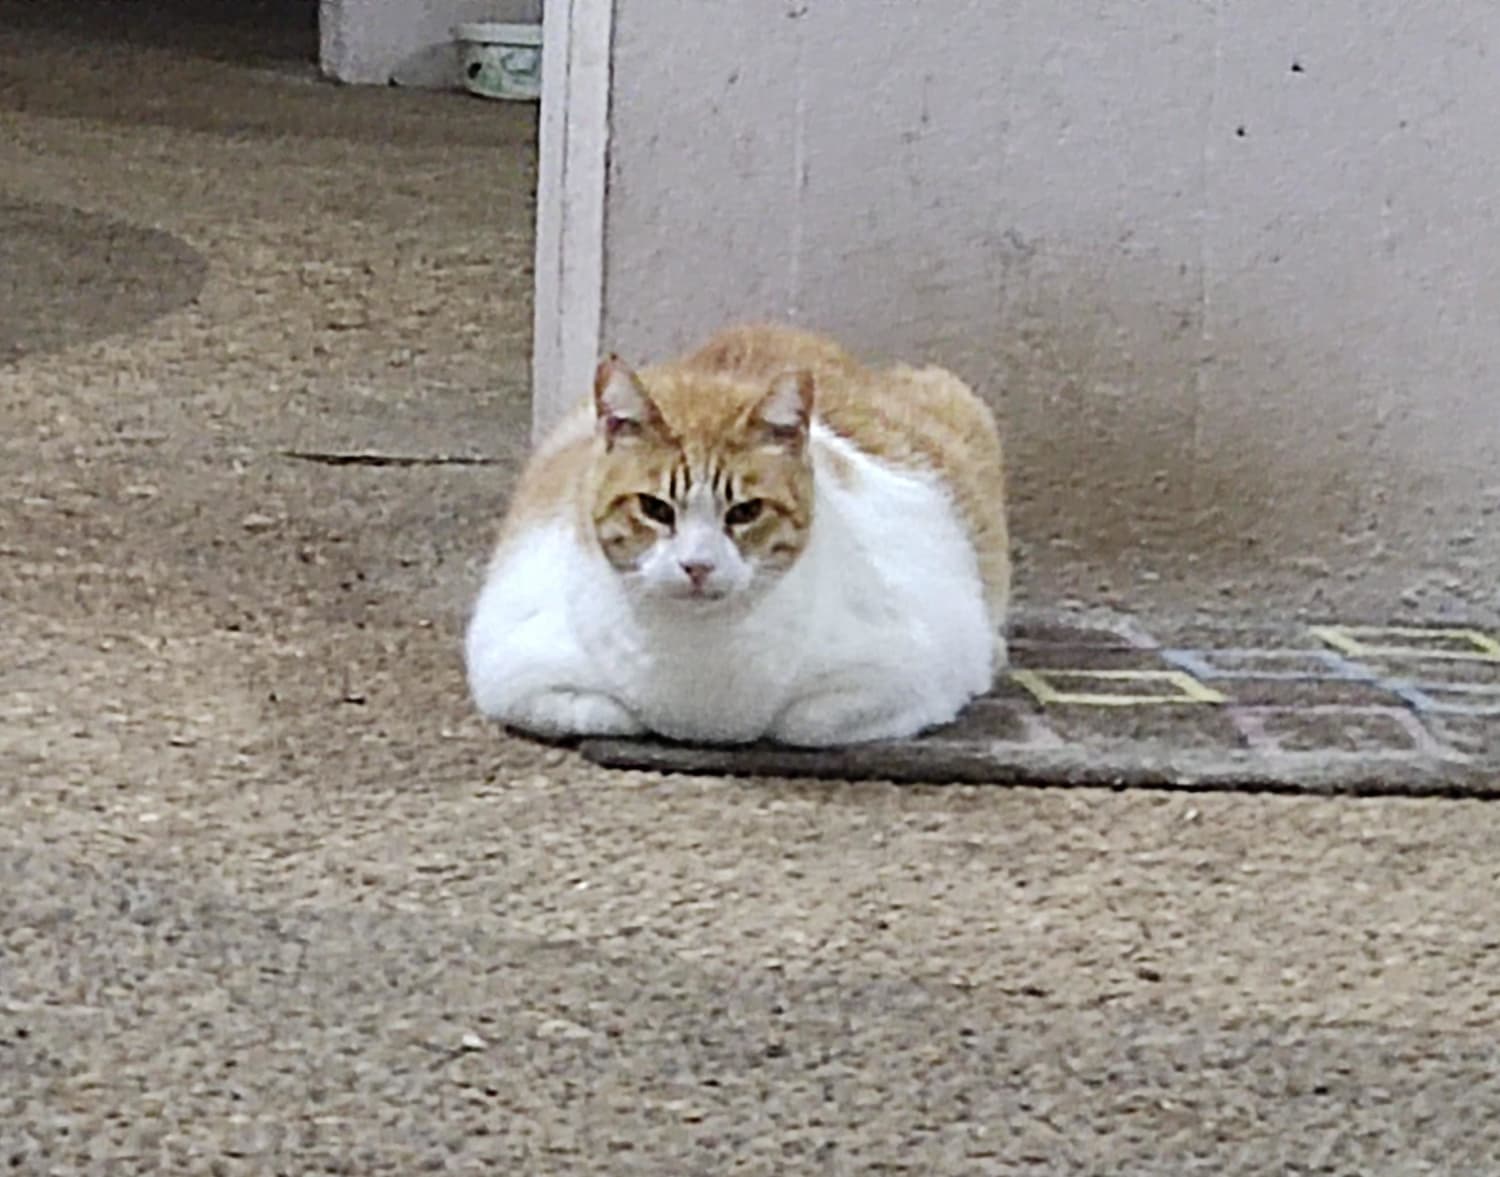 This absolute unit of a cat lives under an apartment building where a couple that feeds stray cats lives. There are about 30 cats in that area, so I won't be surprised if this guy eats all the leftovers. He's not too friendly but let me get close to him because he thought I had food.